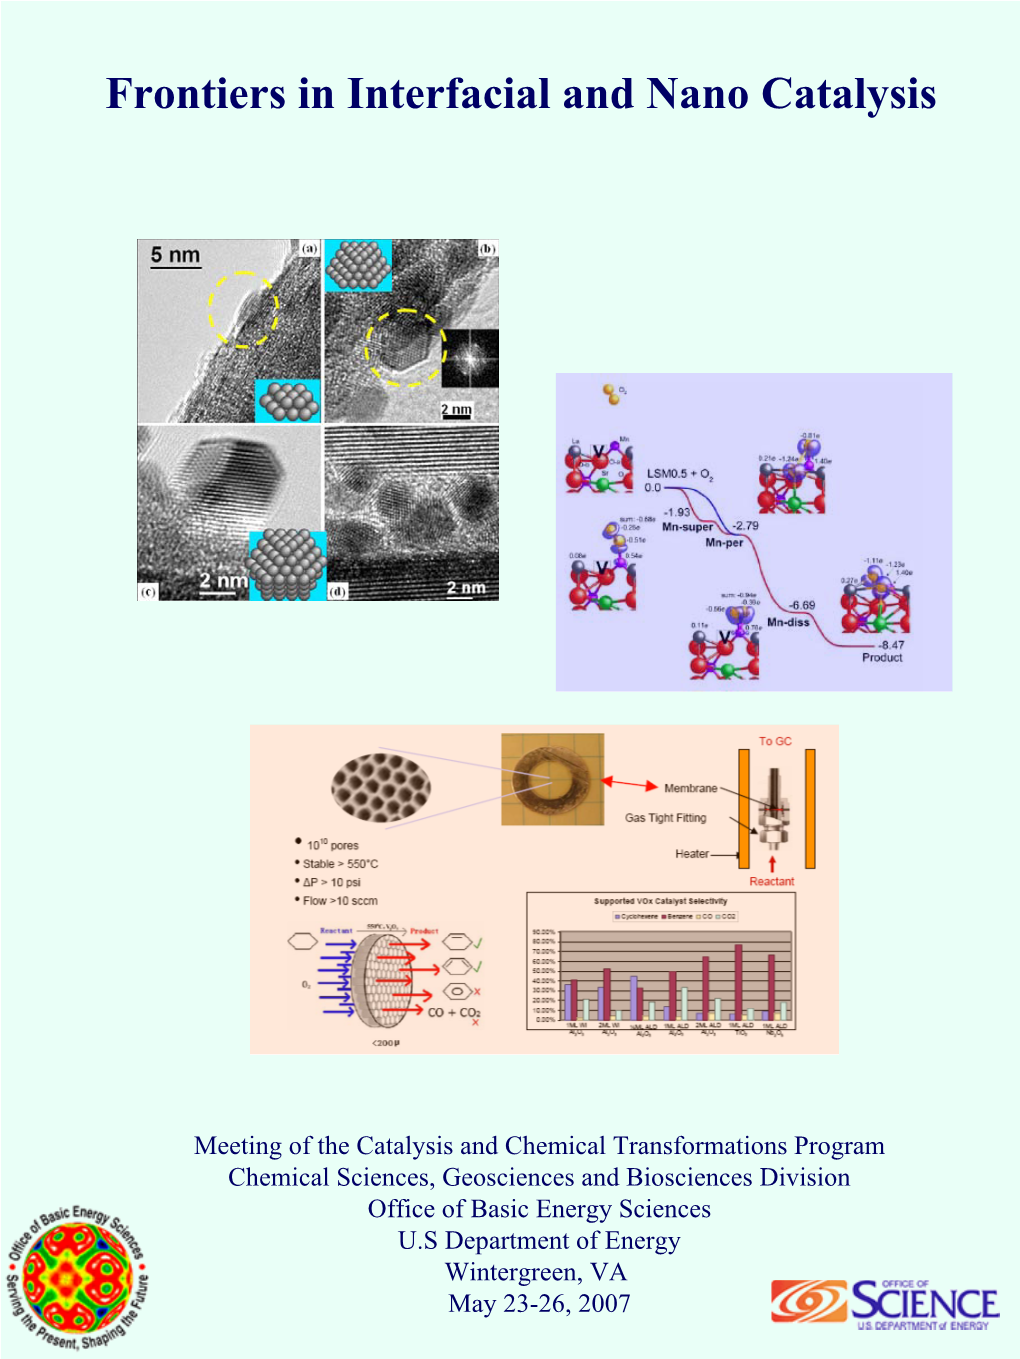 Frontiers in Interfacial and Nano Catalysis